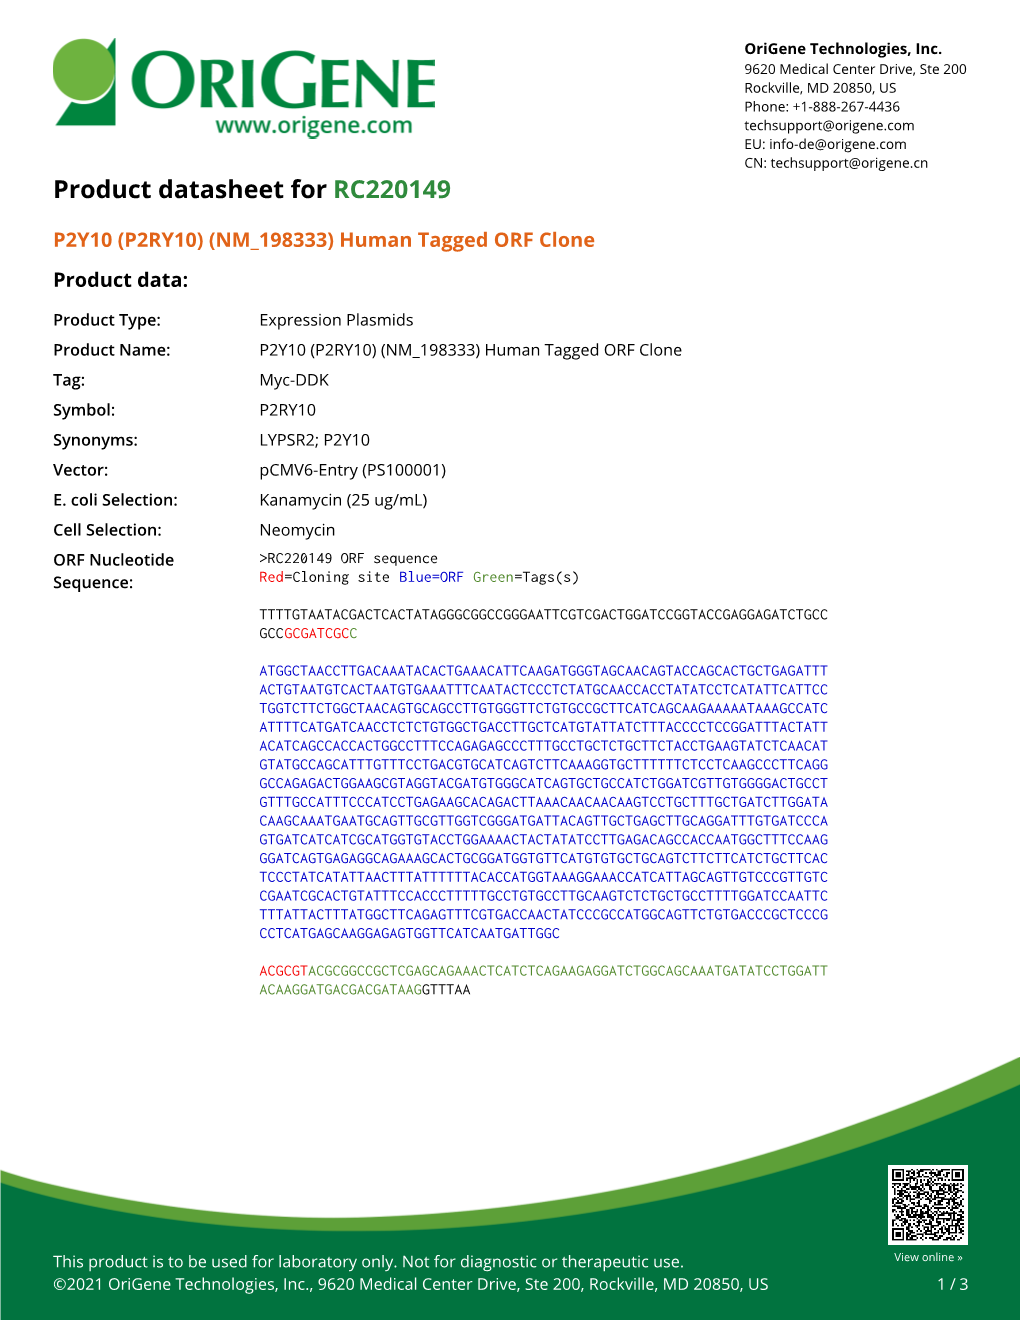 P2Y10 (P2RY10) (NM 198333) Human Tagged ORF Clone Product Data